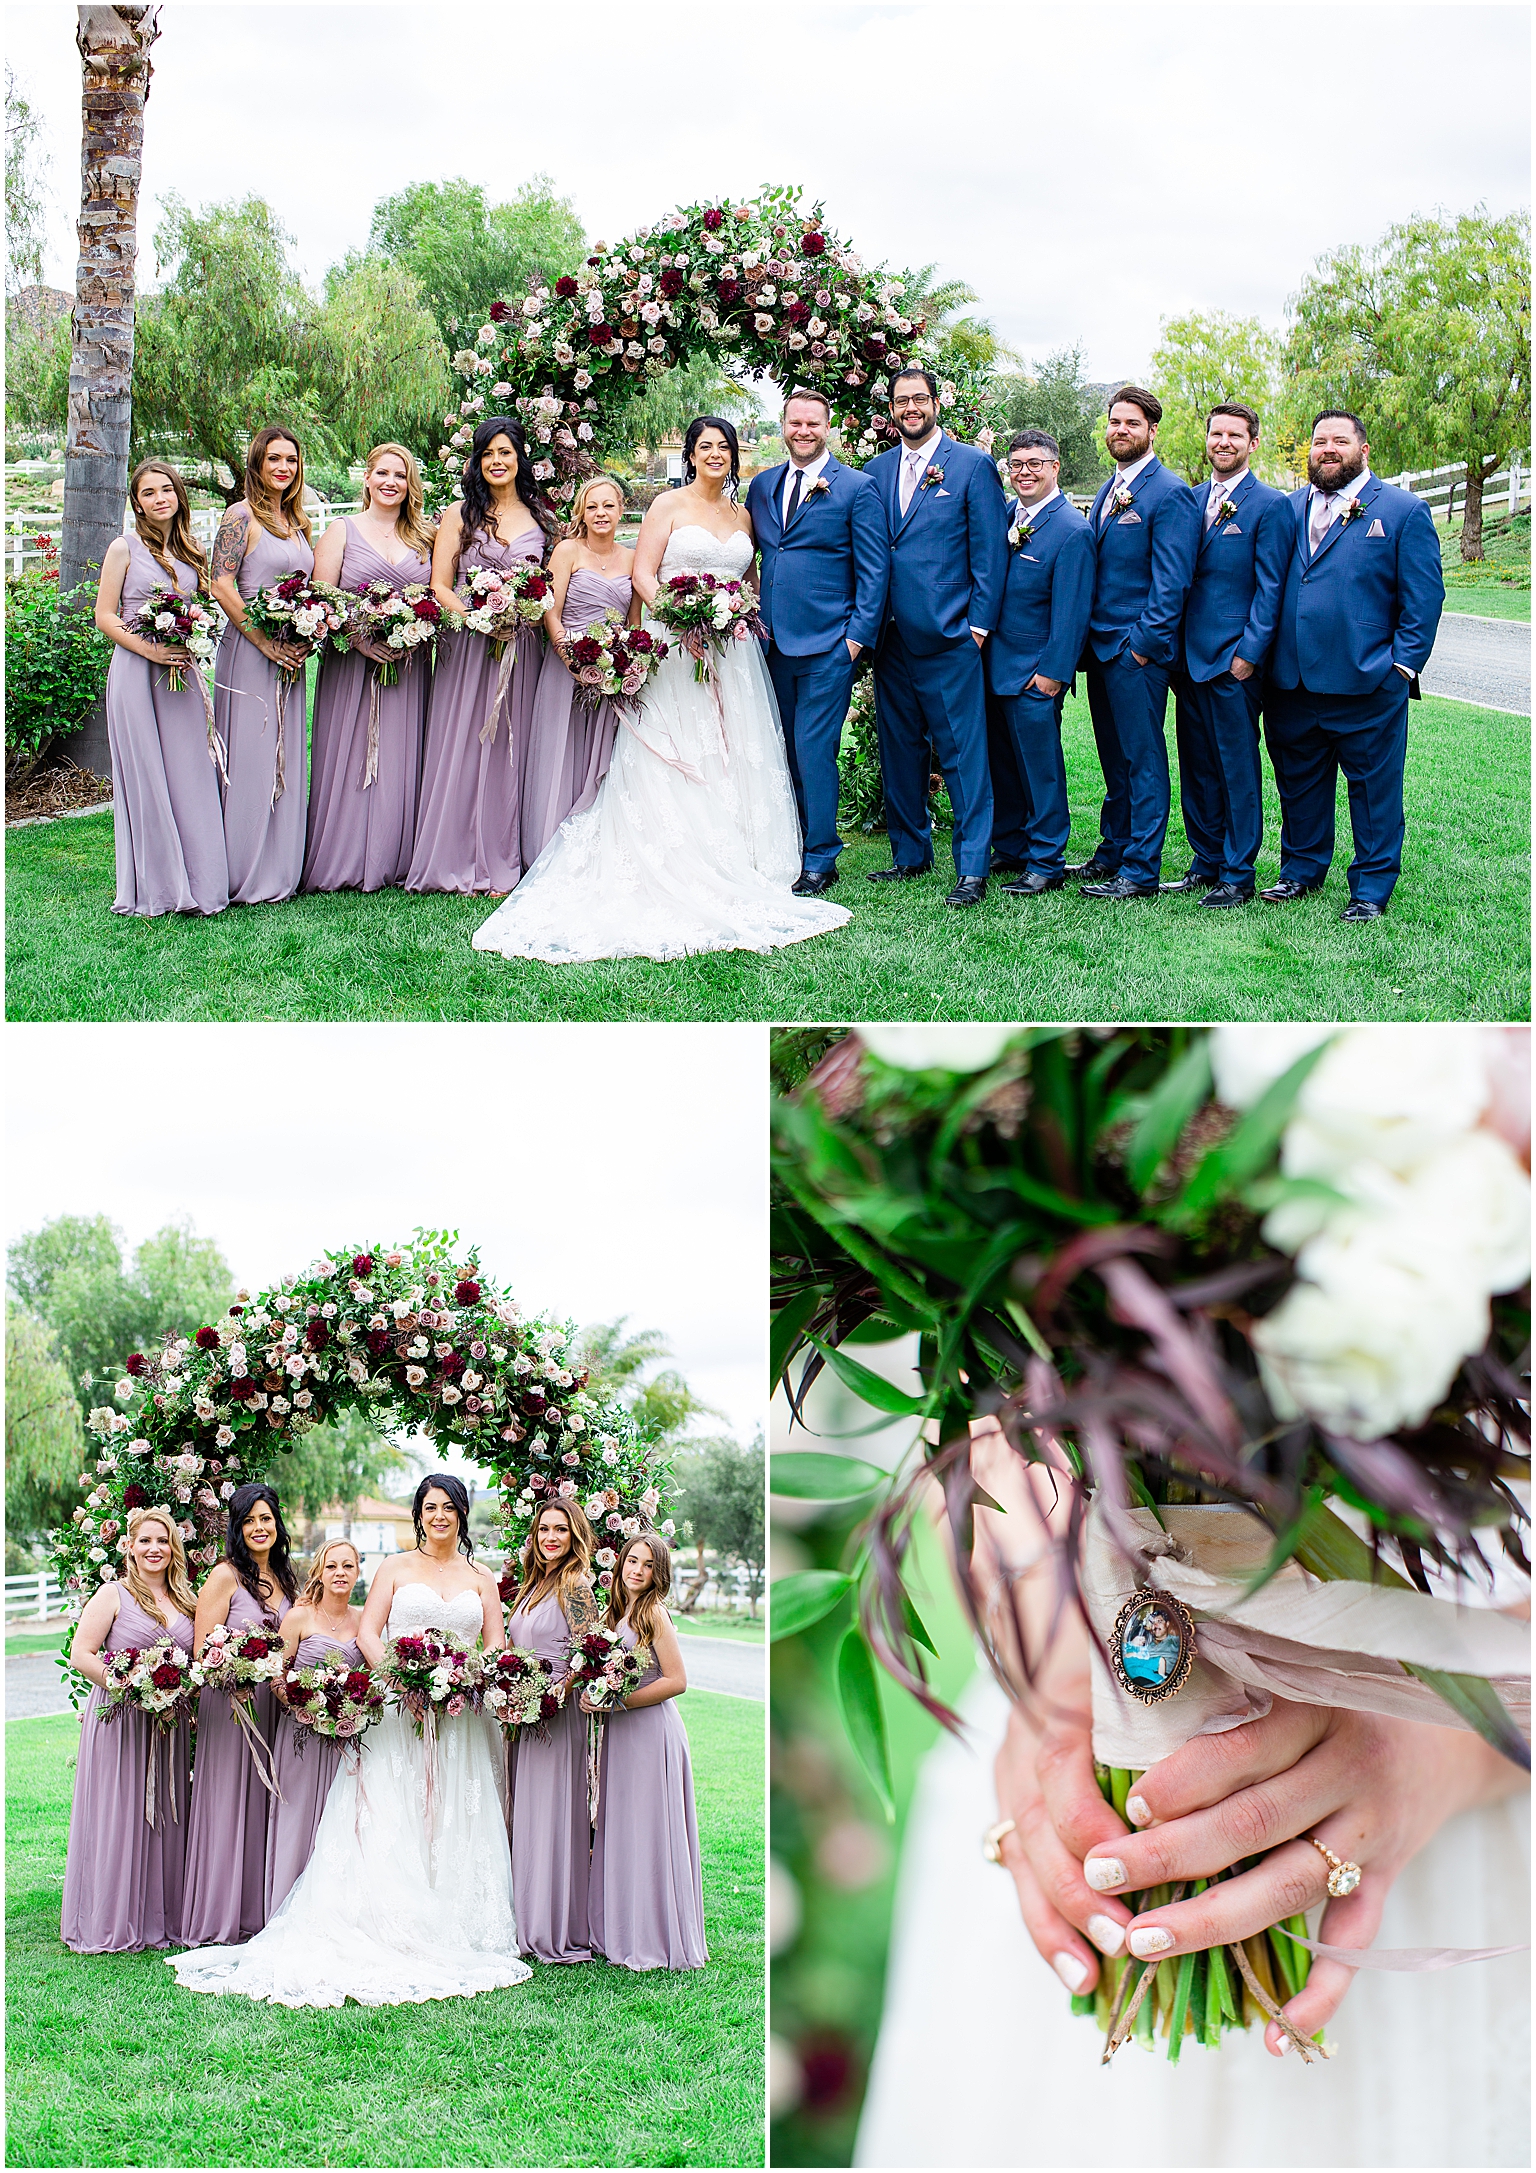 The bridal party in front of a floral arch at a private estate wedding in Temecula